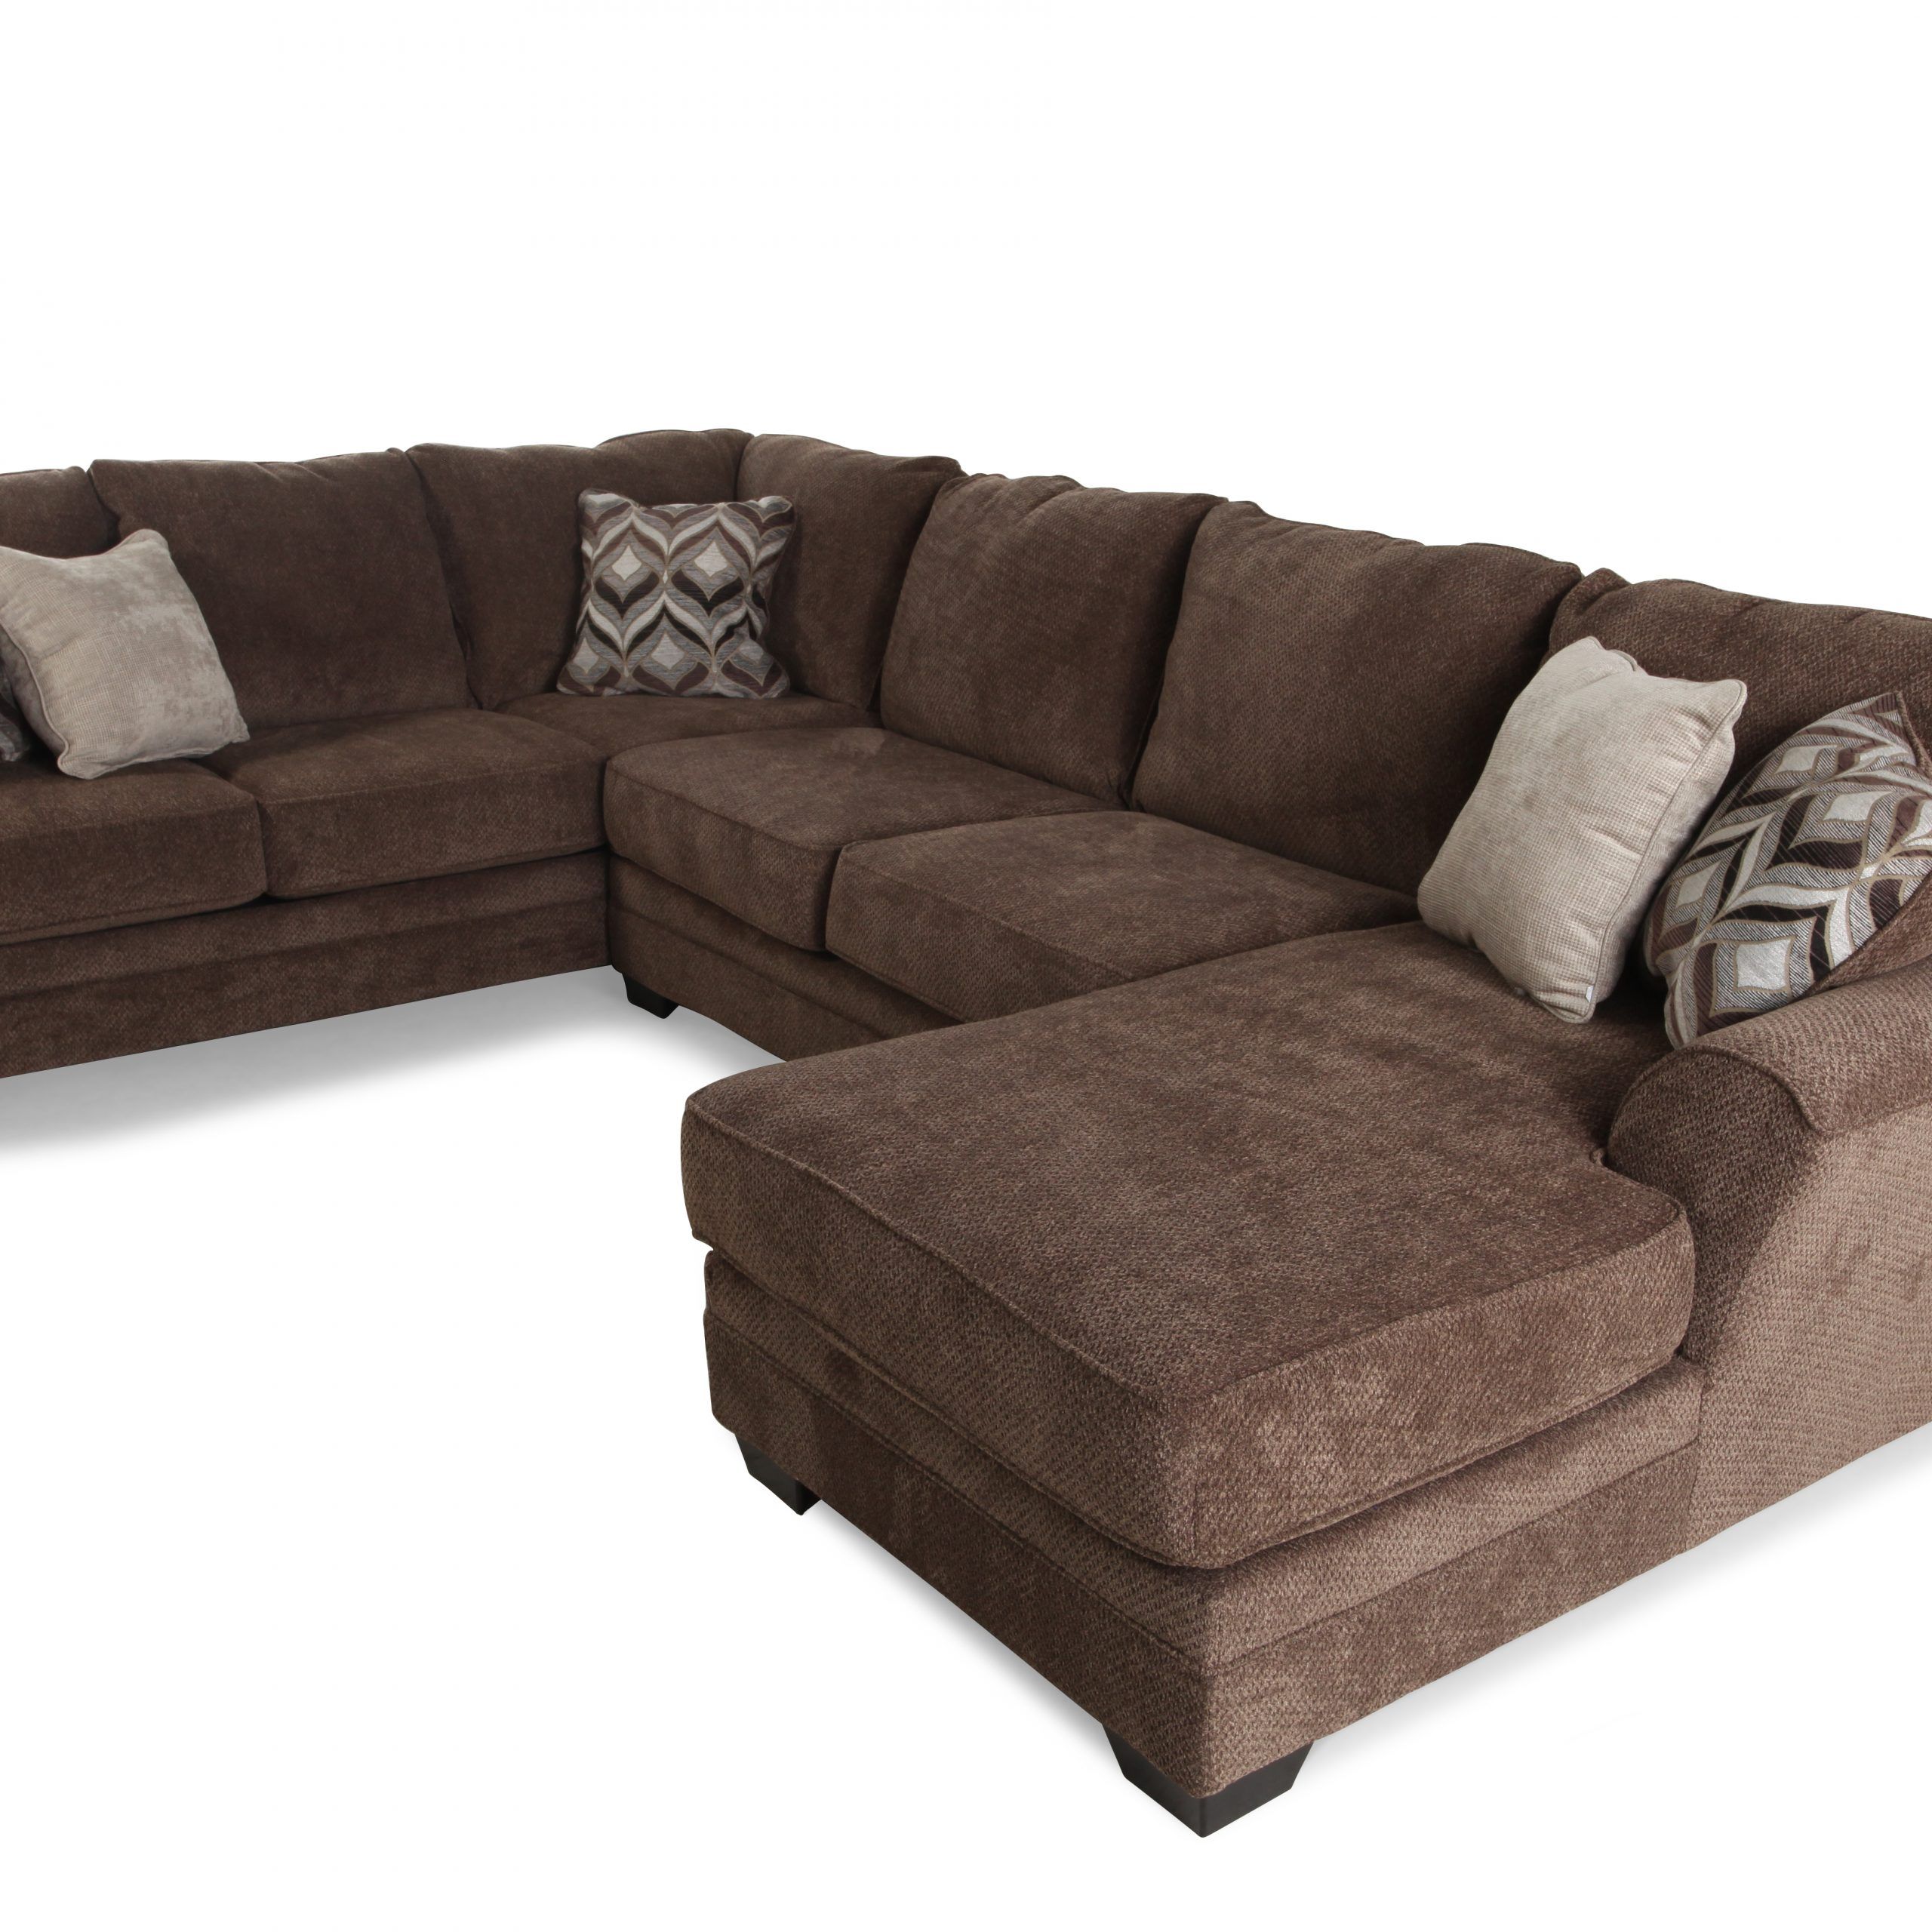 Ashley 3 Piece Sectional | Mathis Brothers Furniture For 3 Piece Console Tables (View 4 of 20)